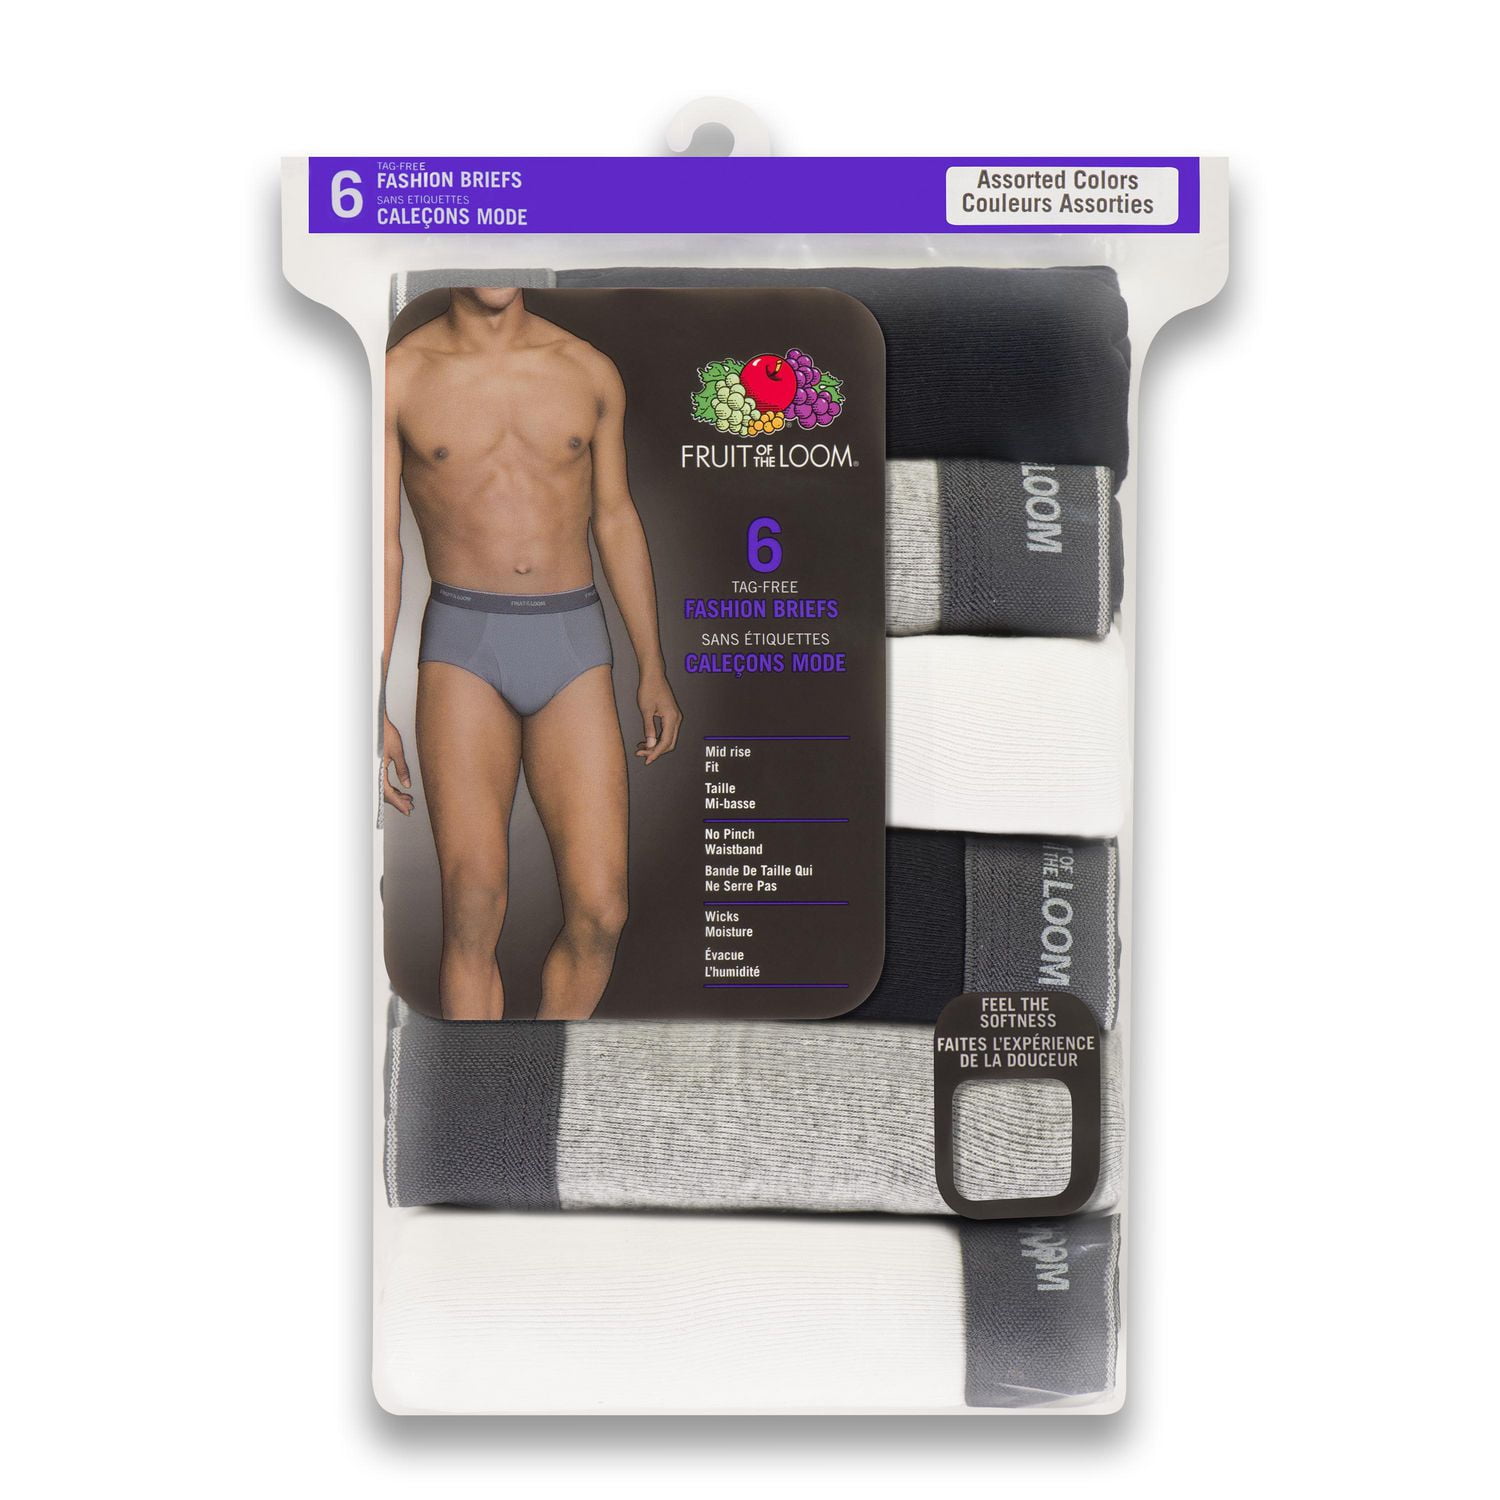 Fruit of the Loom Men's Fashion Briefs, 6 Pack 